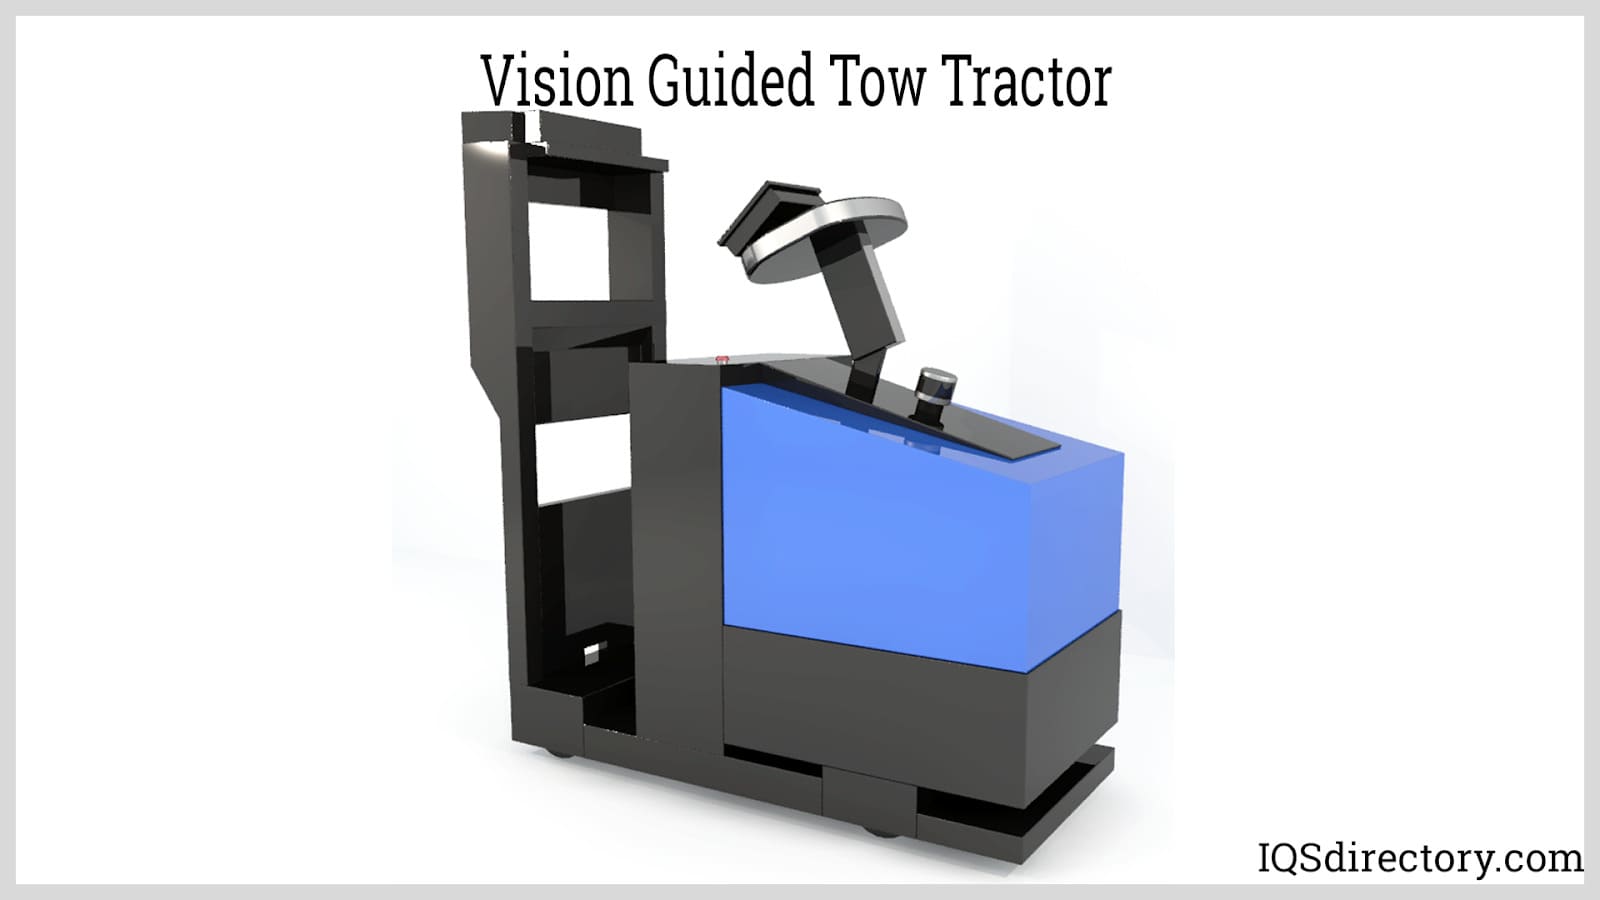 Vision Guided Tow Tractor